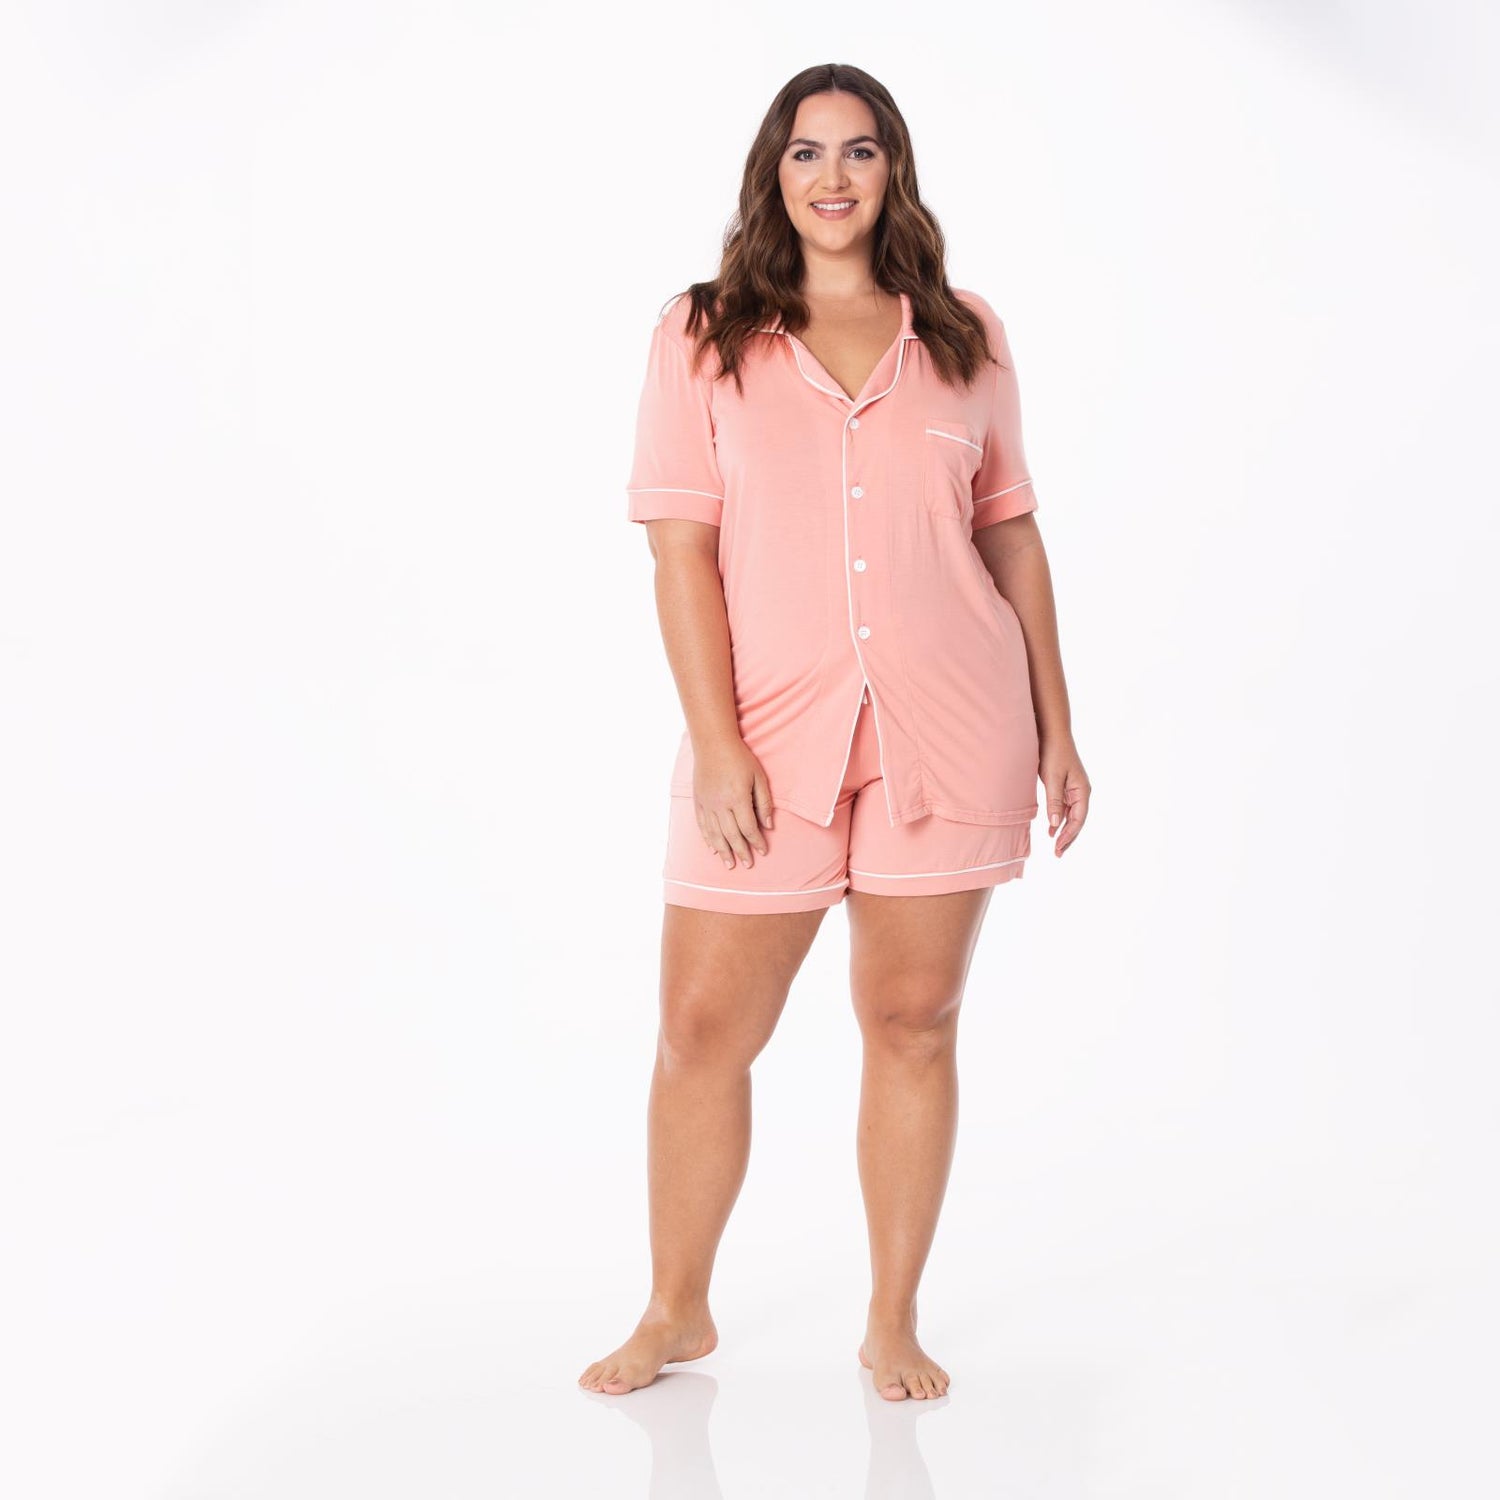 Women's Short Sleeve Collared Pajama Set with Shorts in Blush with Natural